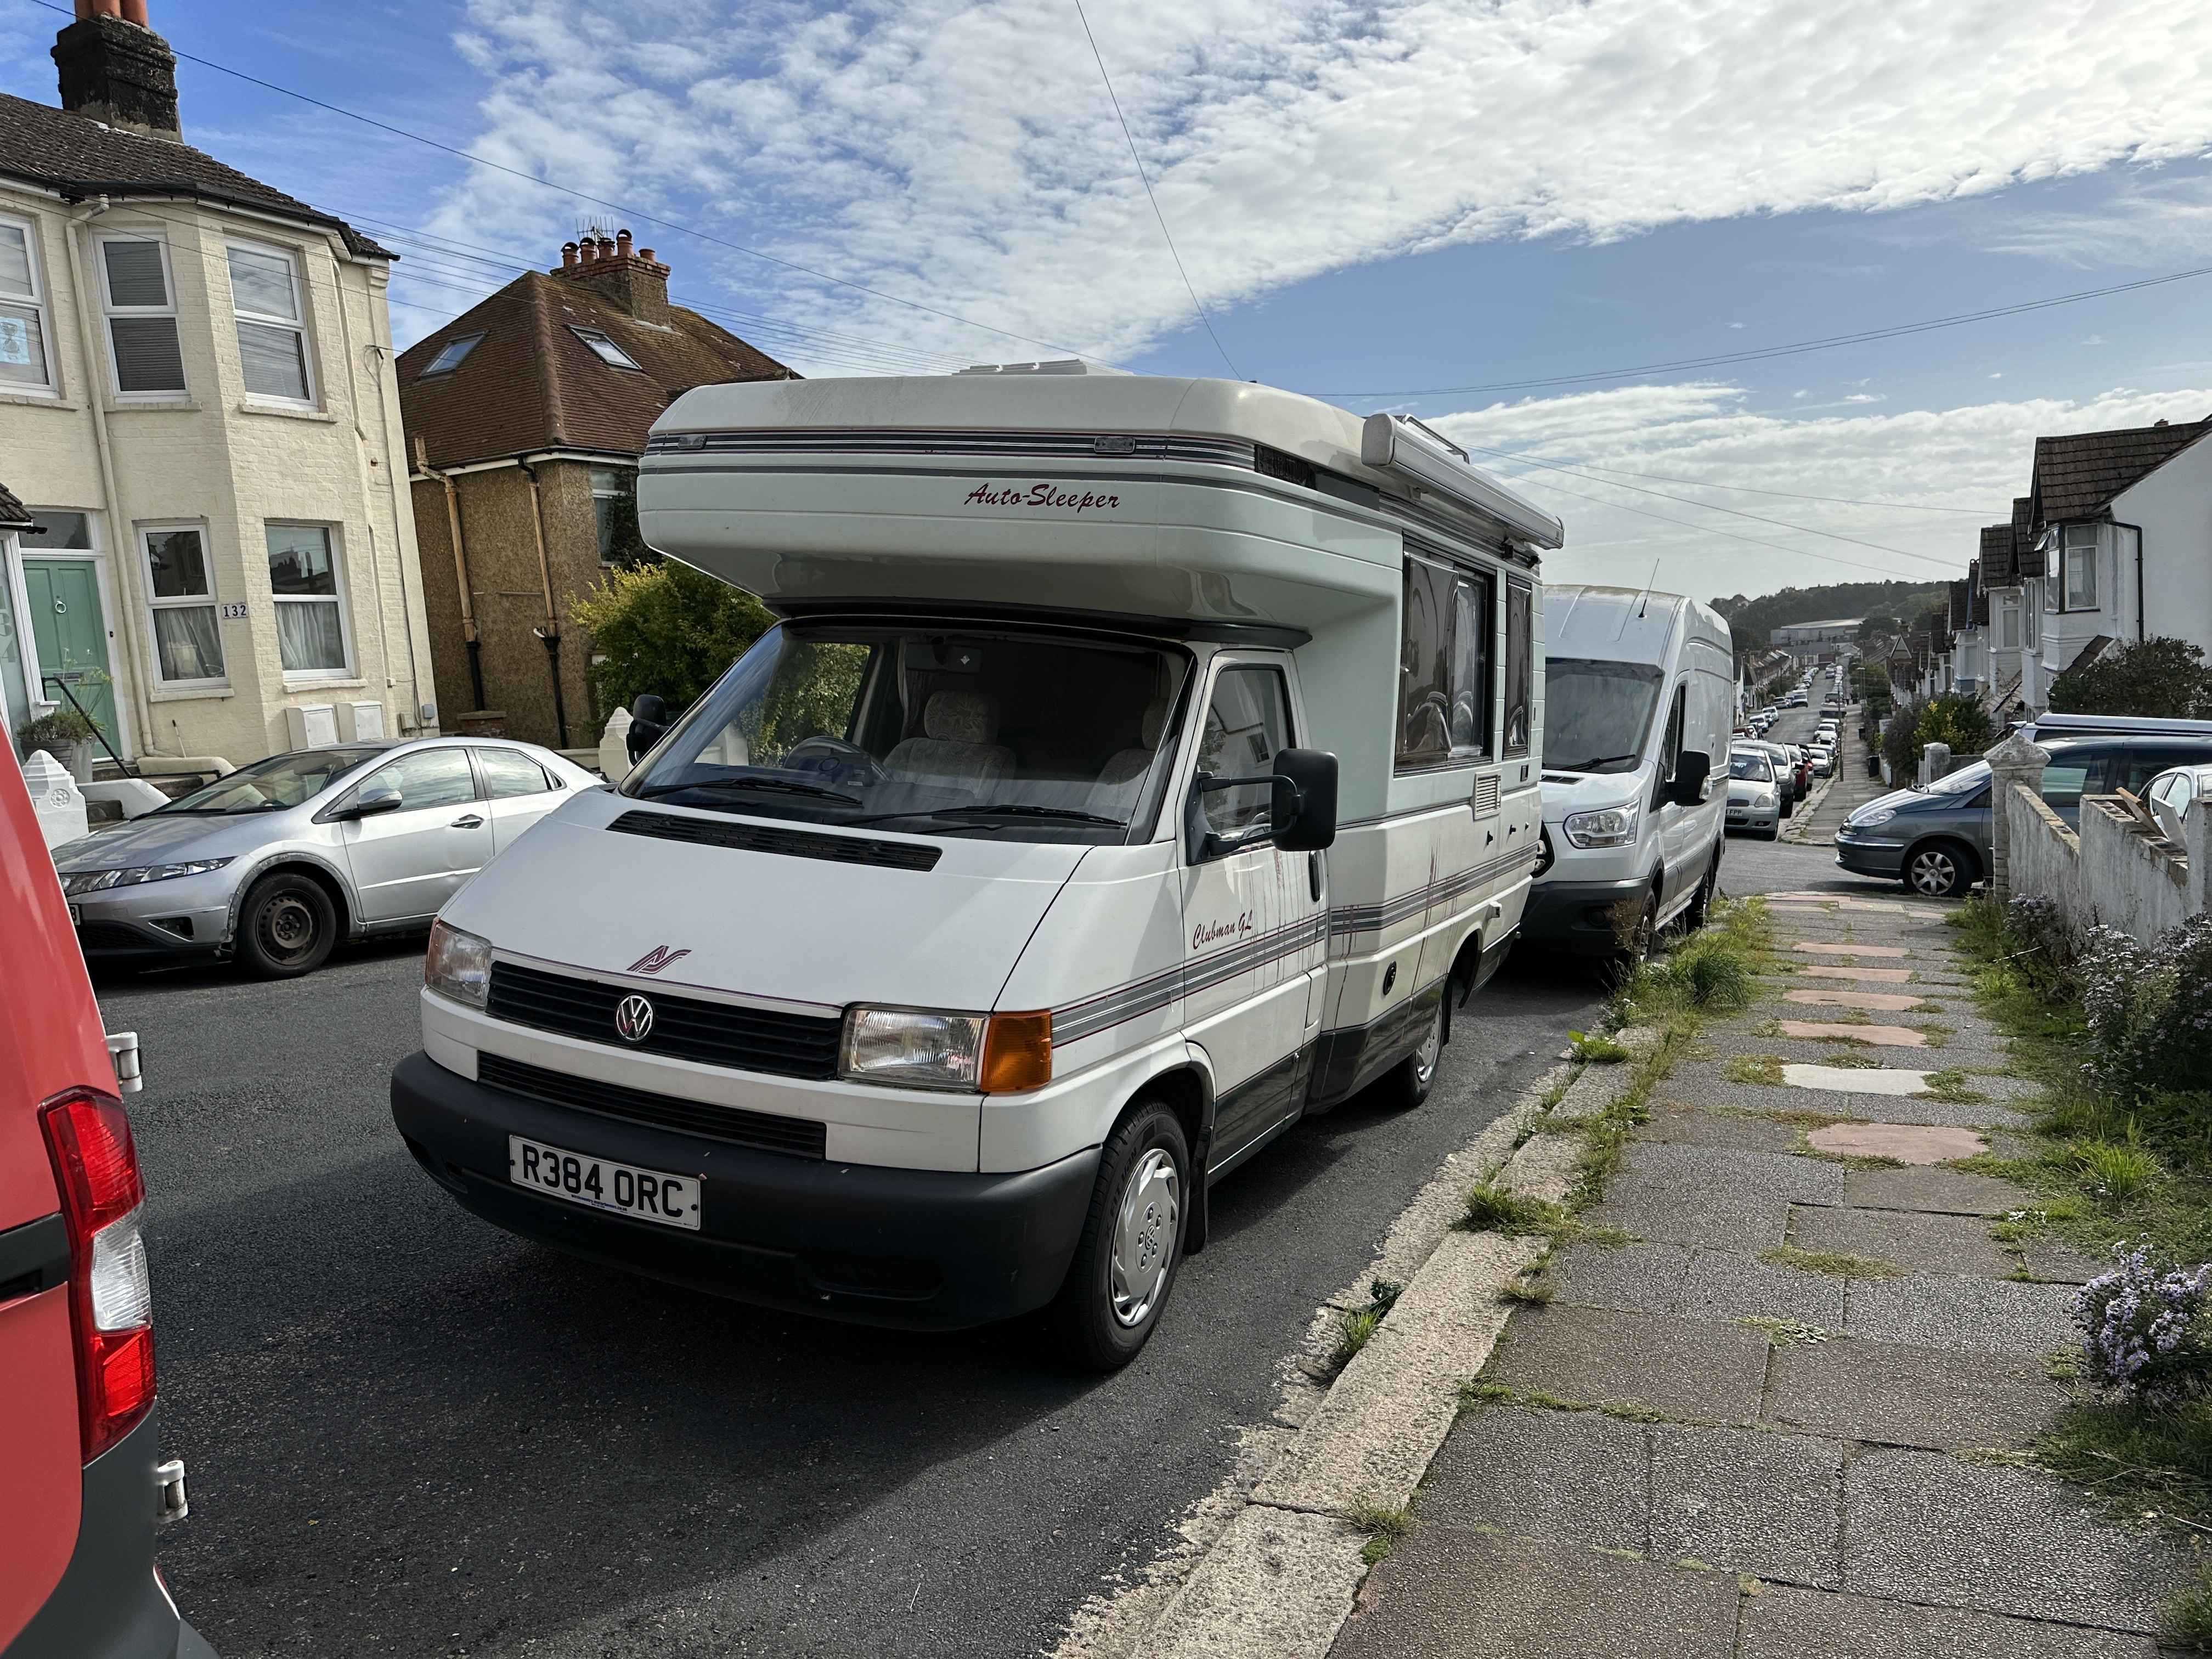 Photograph of R384 ORC - a Beige Volkswagen Transporter camper van parked in Hollingdean by a non-resident, and potentially abandoned. The fifth of twelve photographs supplied by the residents of Hollingdean.